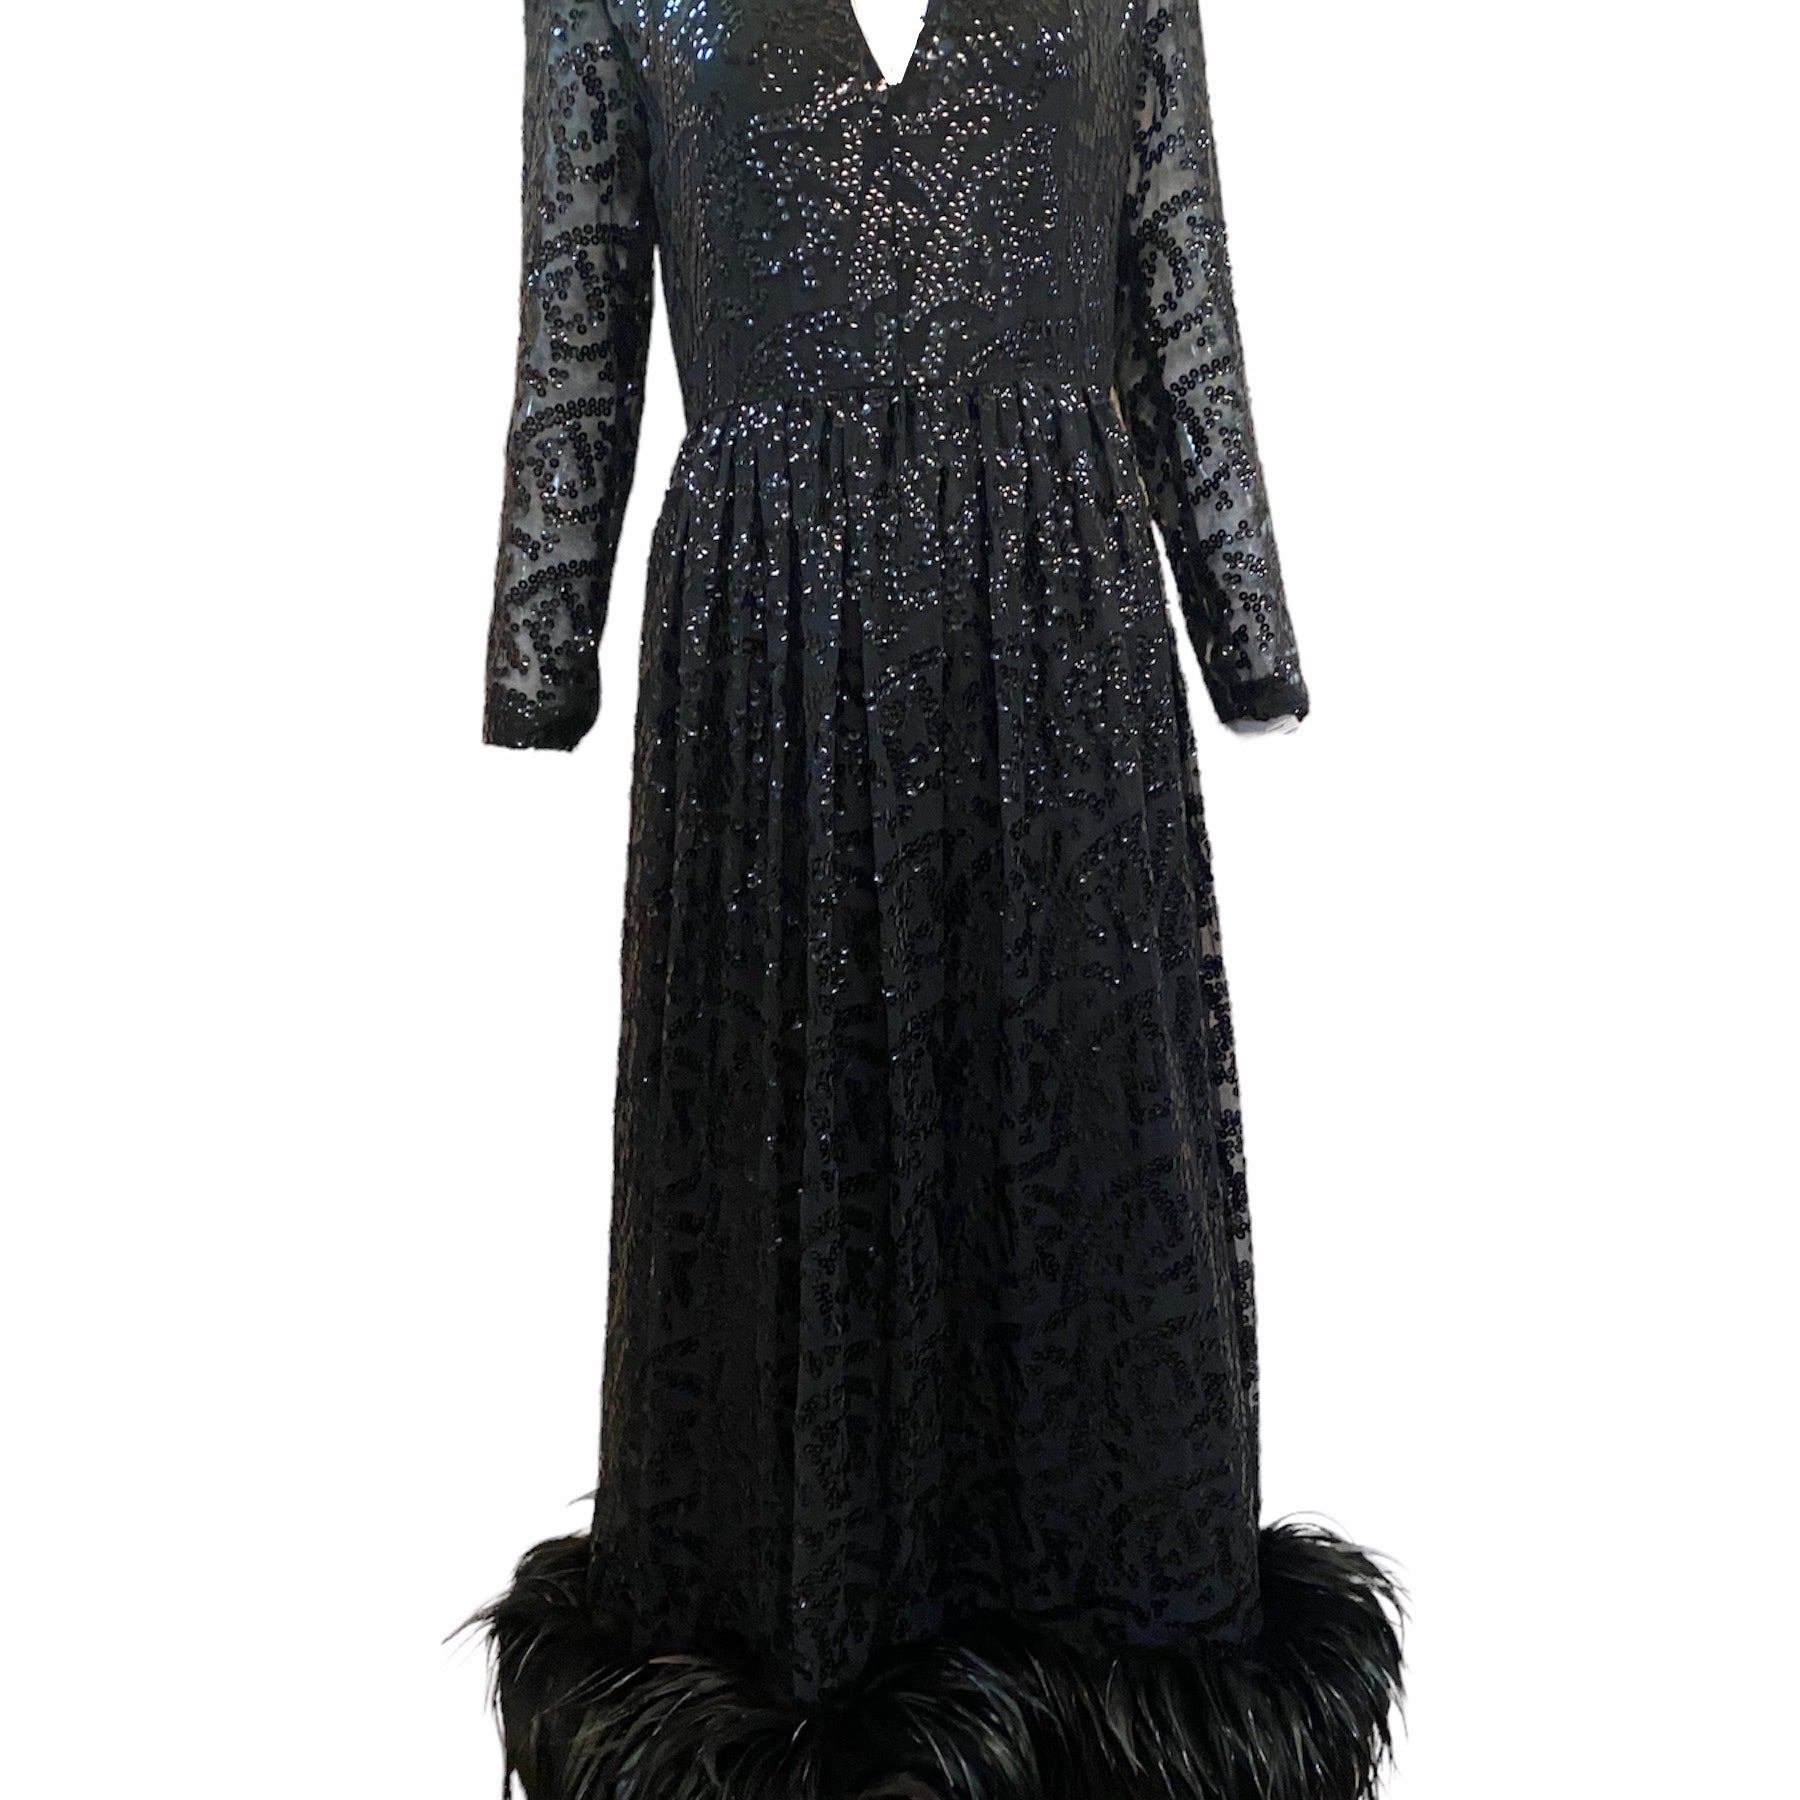  Bill Blass Atttribution 70s Black Sequin Gown With Feather Hem FRONT 1 of 5